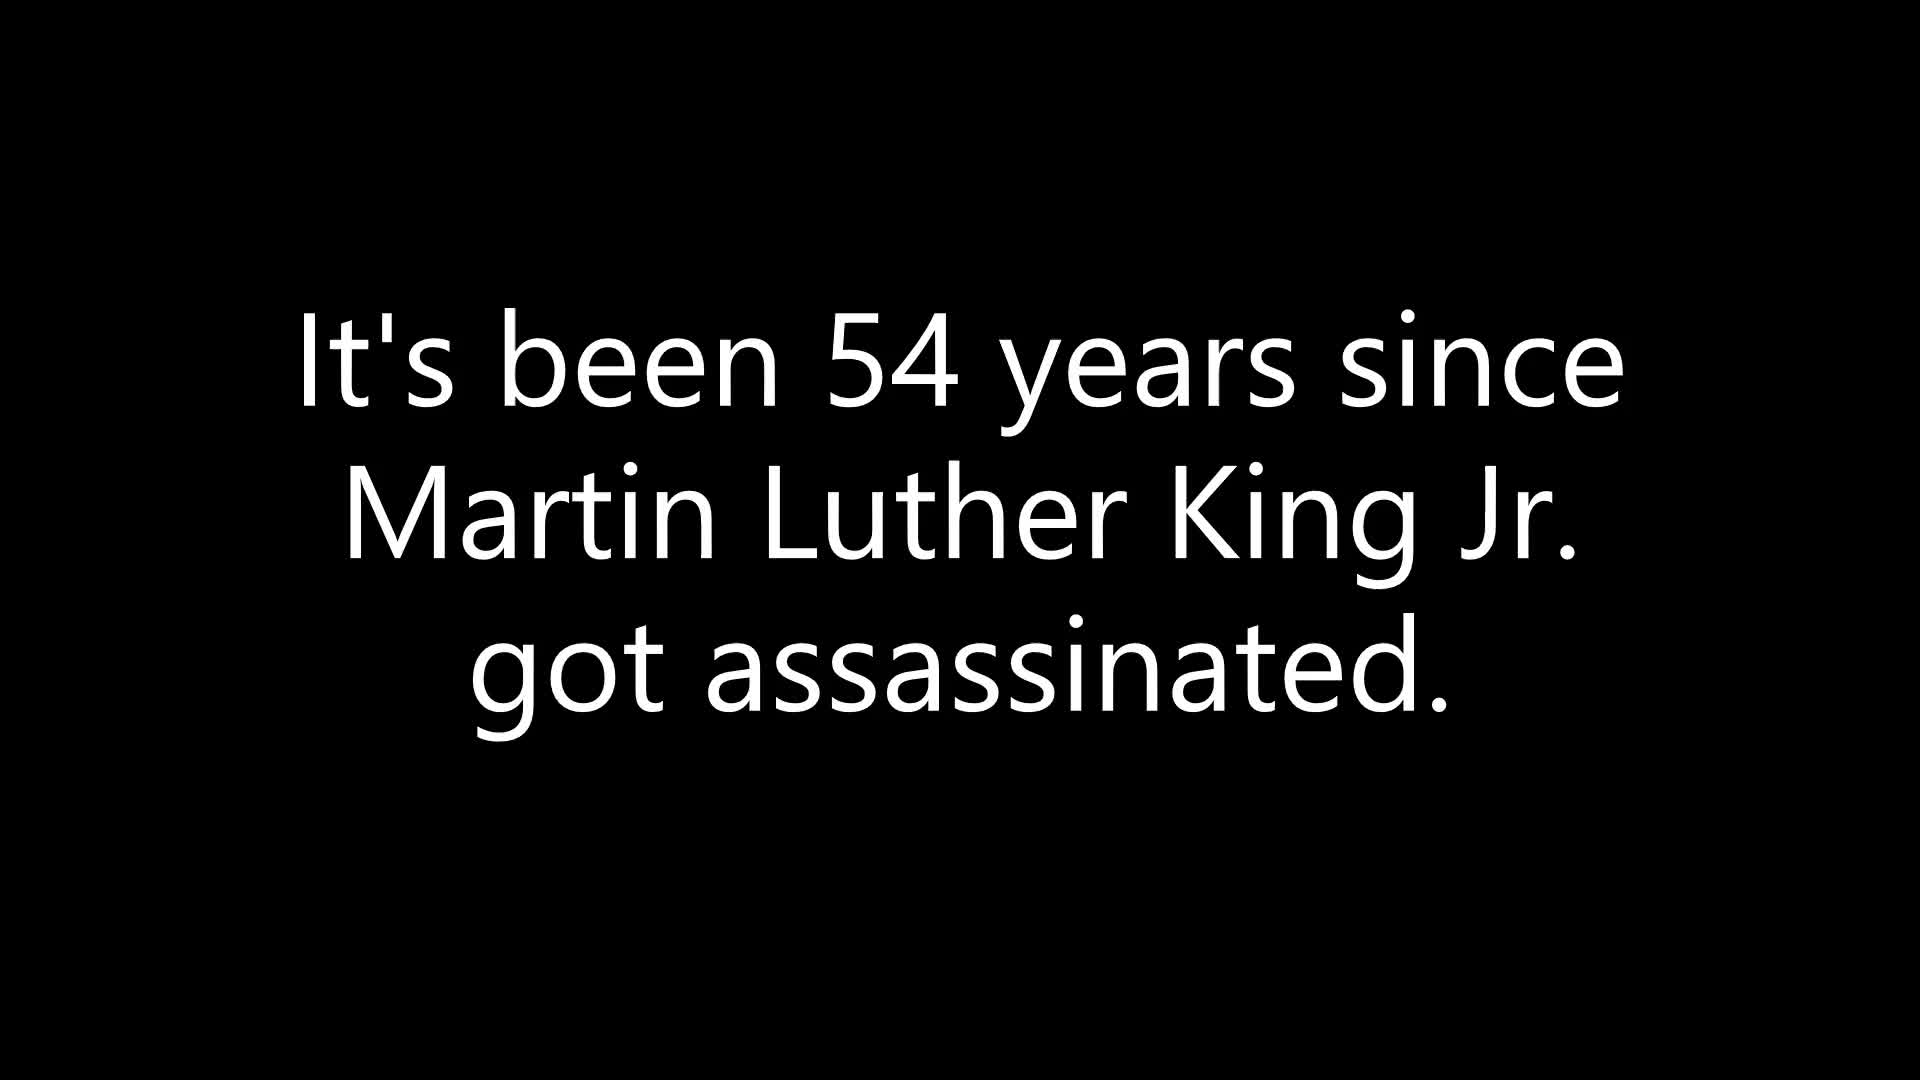 Its been 54 years since Martin Luther King Jr. got assassinated